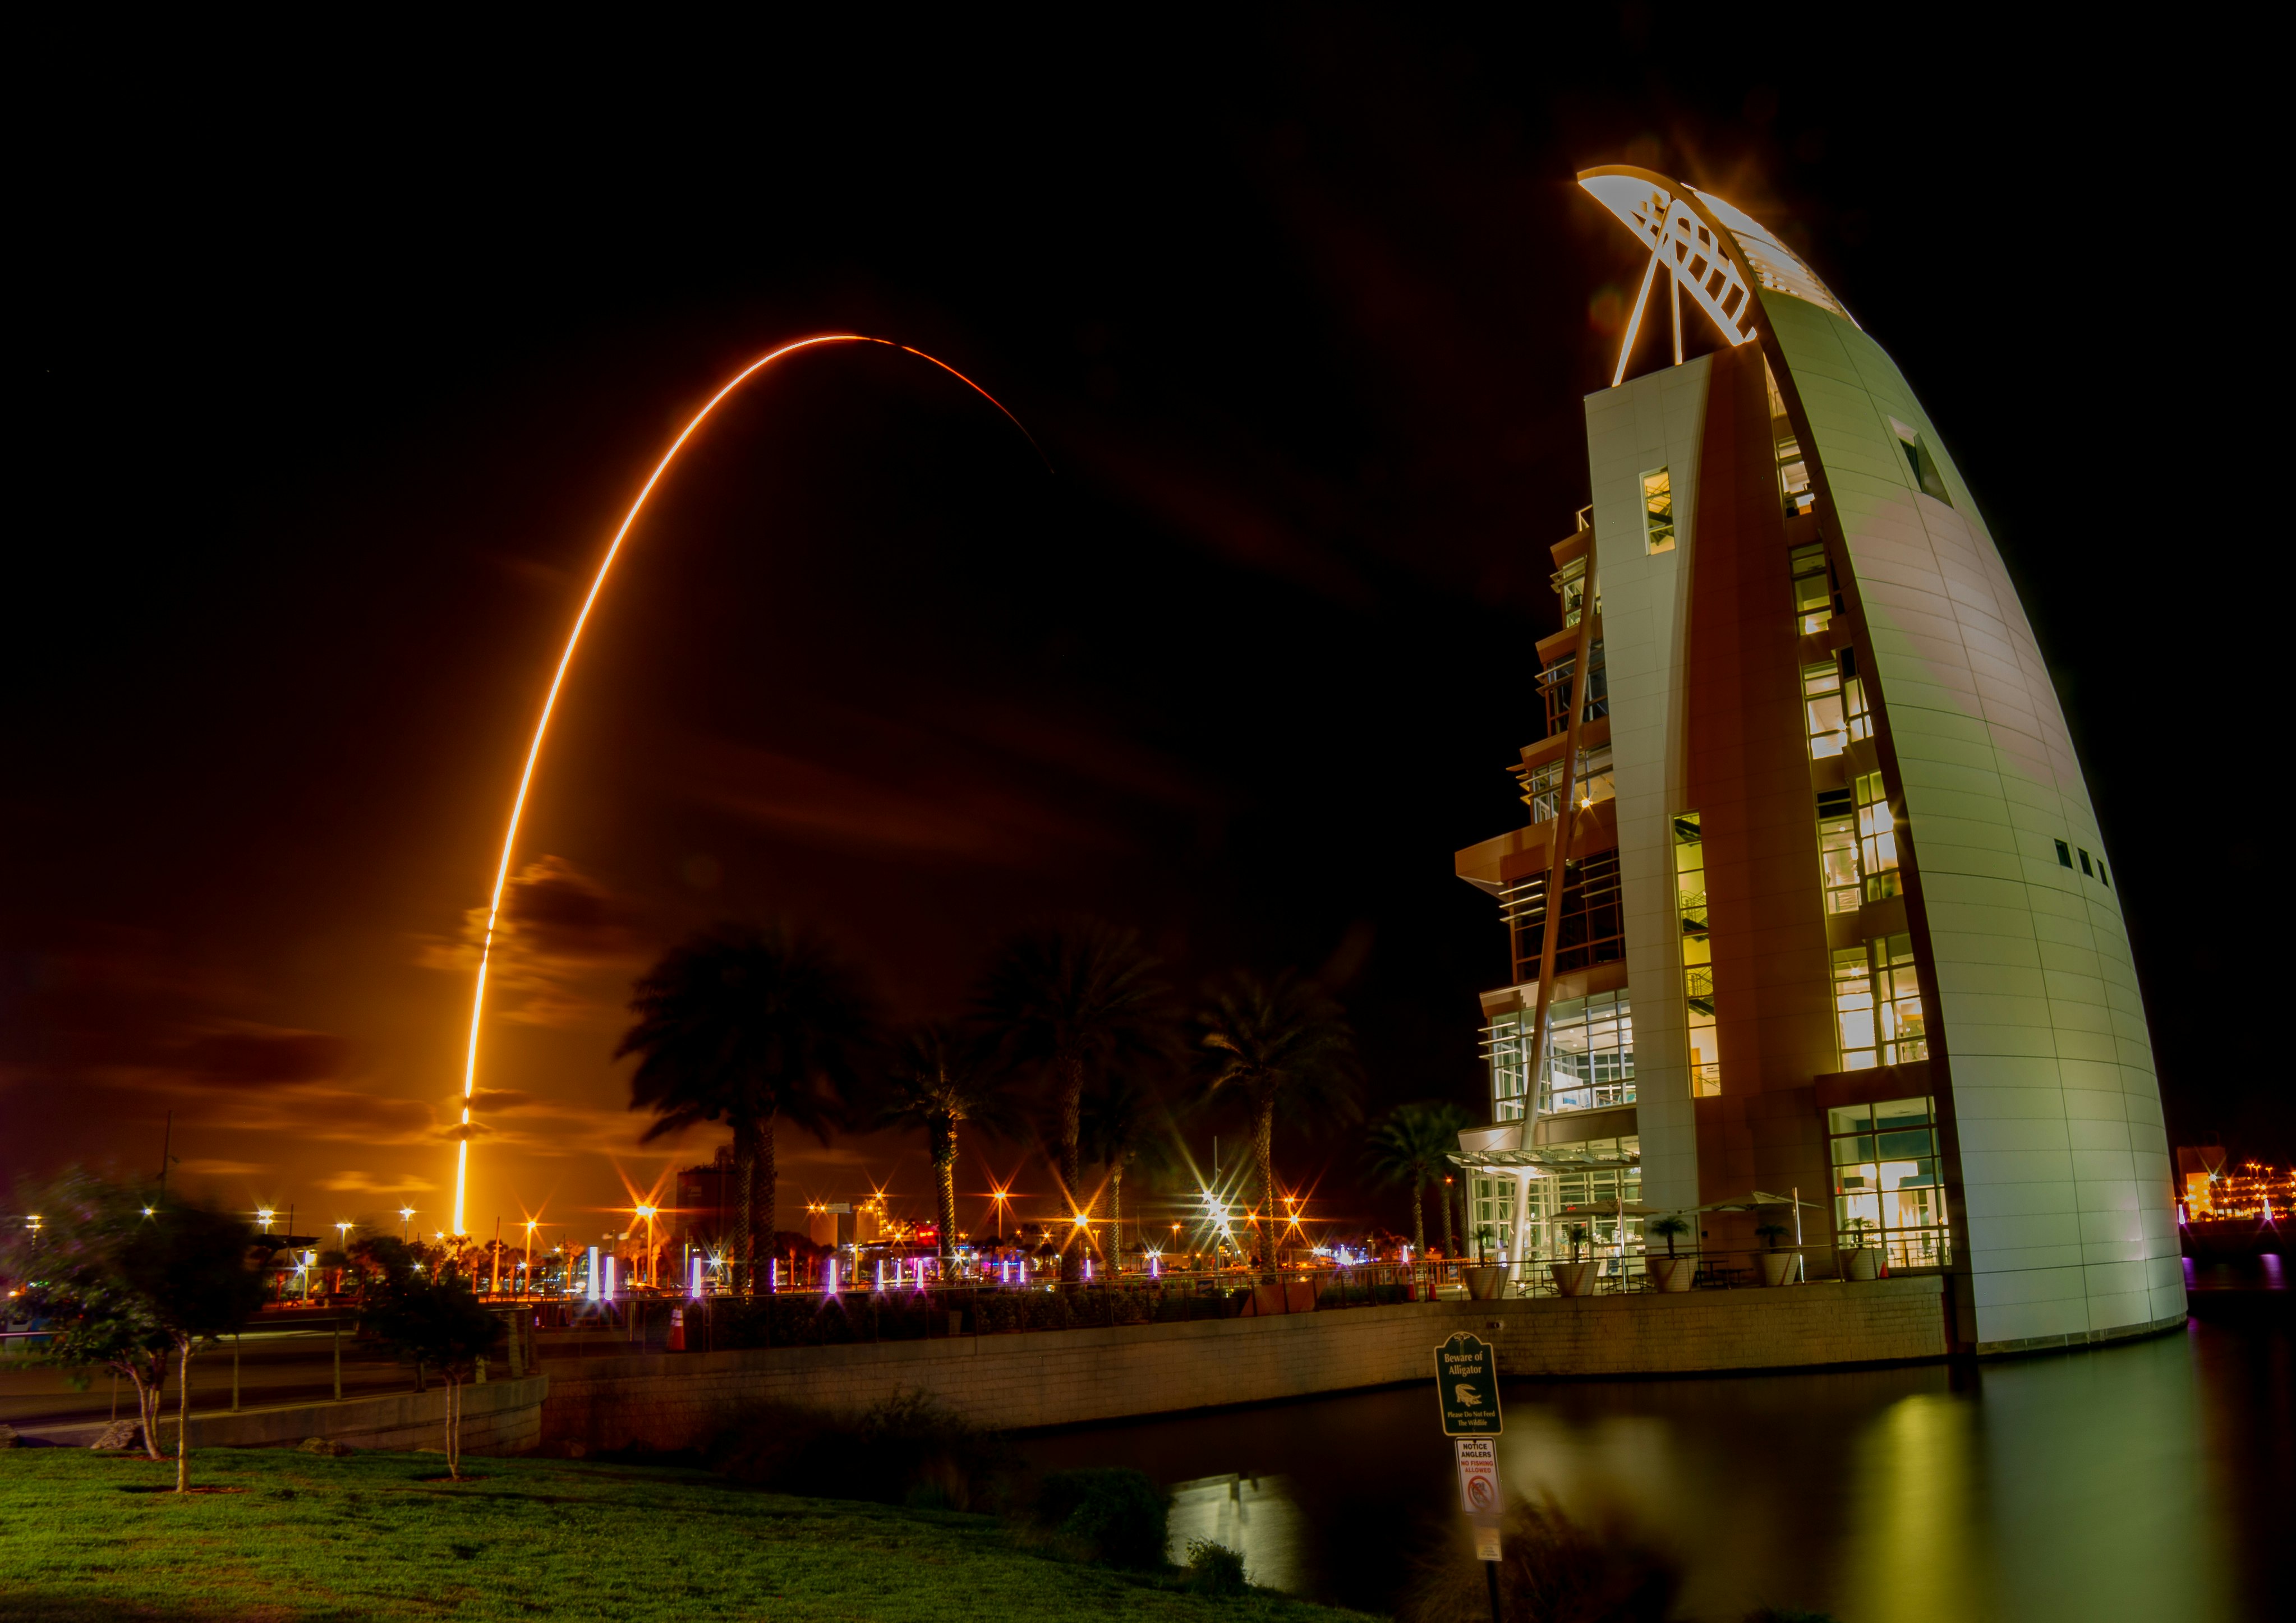 This is a 151-second exposure of a SpaceX Falcon 9 delivering 60 Starlink satellites to orbit on the evening of May 23, 2019. Shot near the 7-story Exploration Tower, the streak and the tower have a nice mirror symmetry. I would love to say that I planned this. I was heading to another spot about 3 miles west to photograph the launch and the new owners had a chain across the road and ominous "No Trespassing" signs, so I had to choose another spot to set up with about 15 minutes to go.